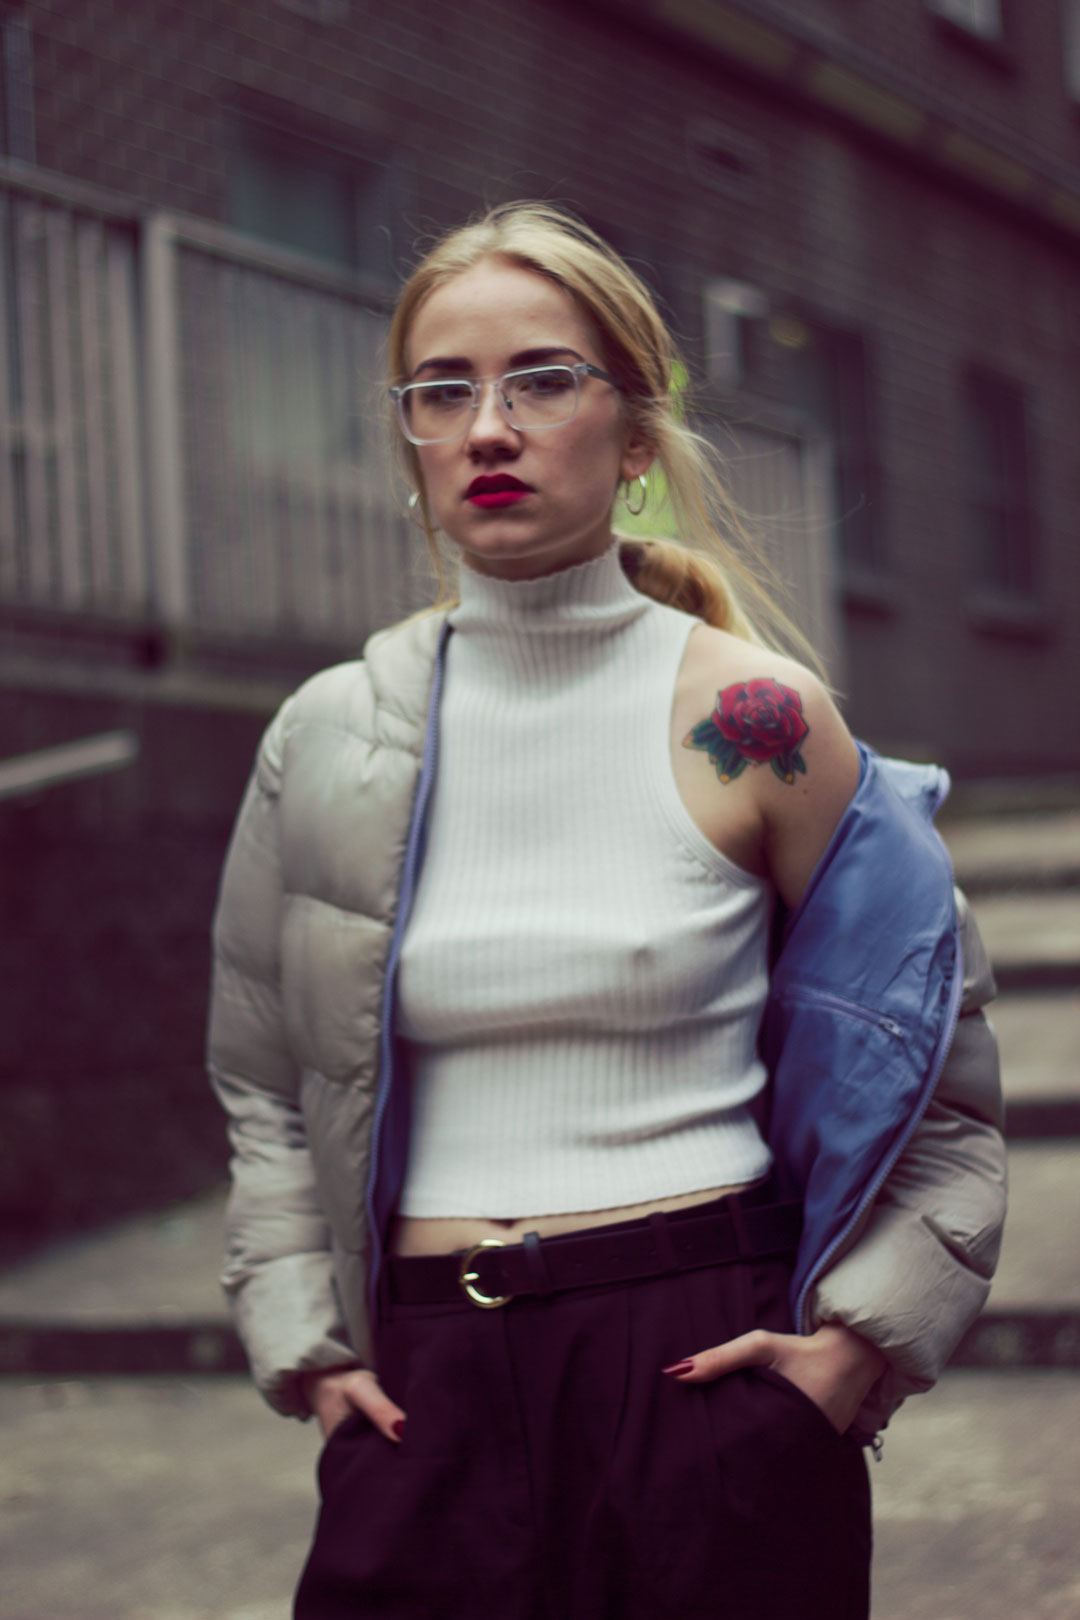 Portrait of young blonde woman in street wearing puff jacket and grey eyeglasses staring directly at viewer